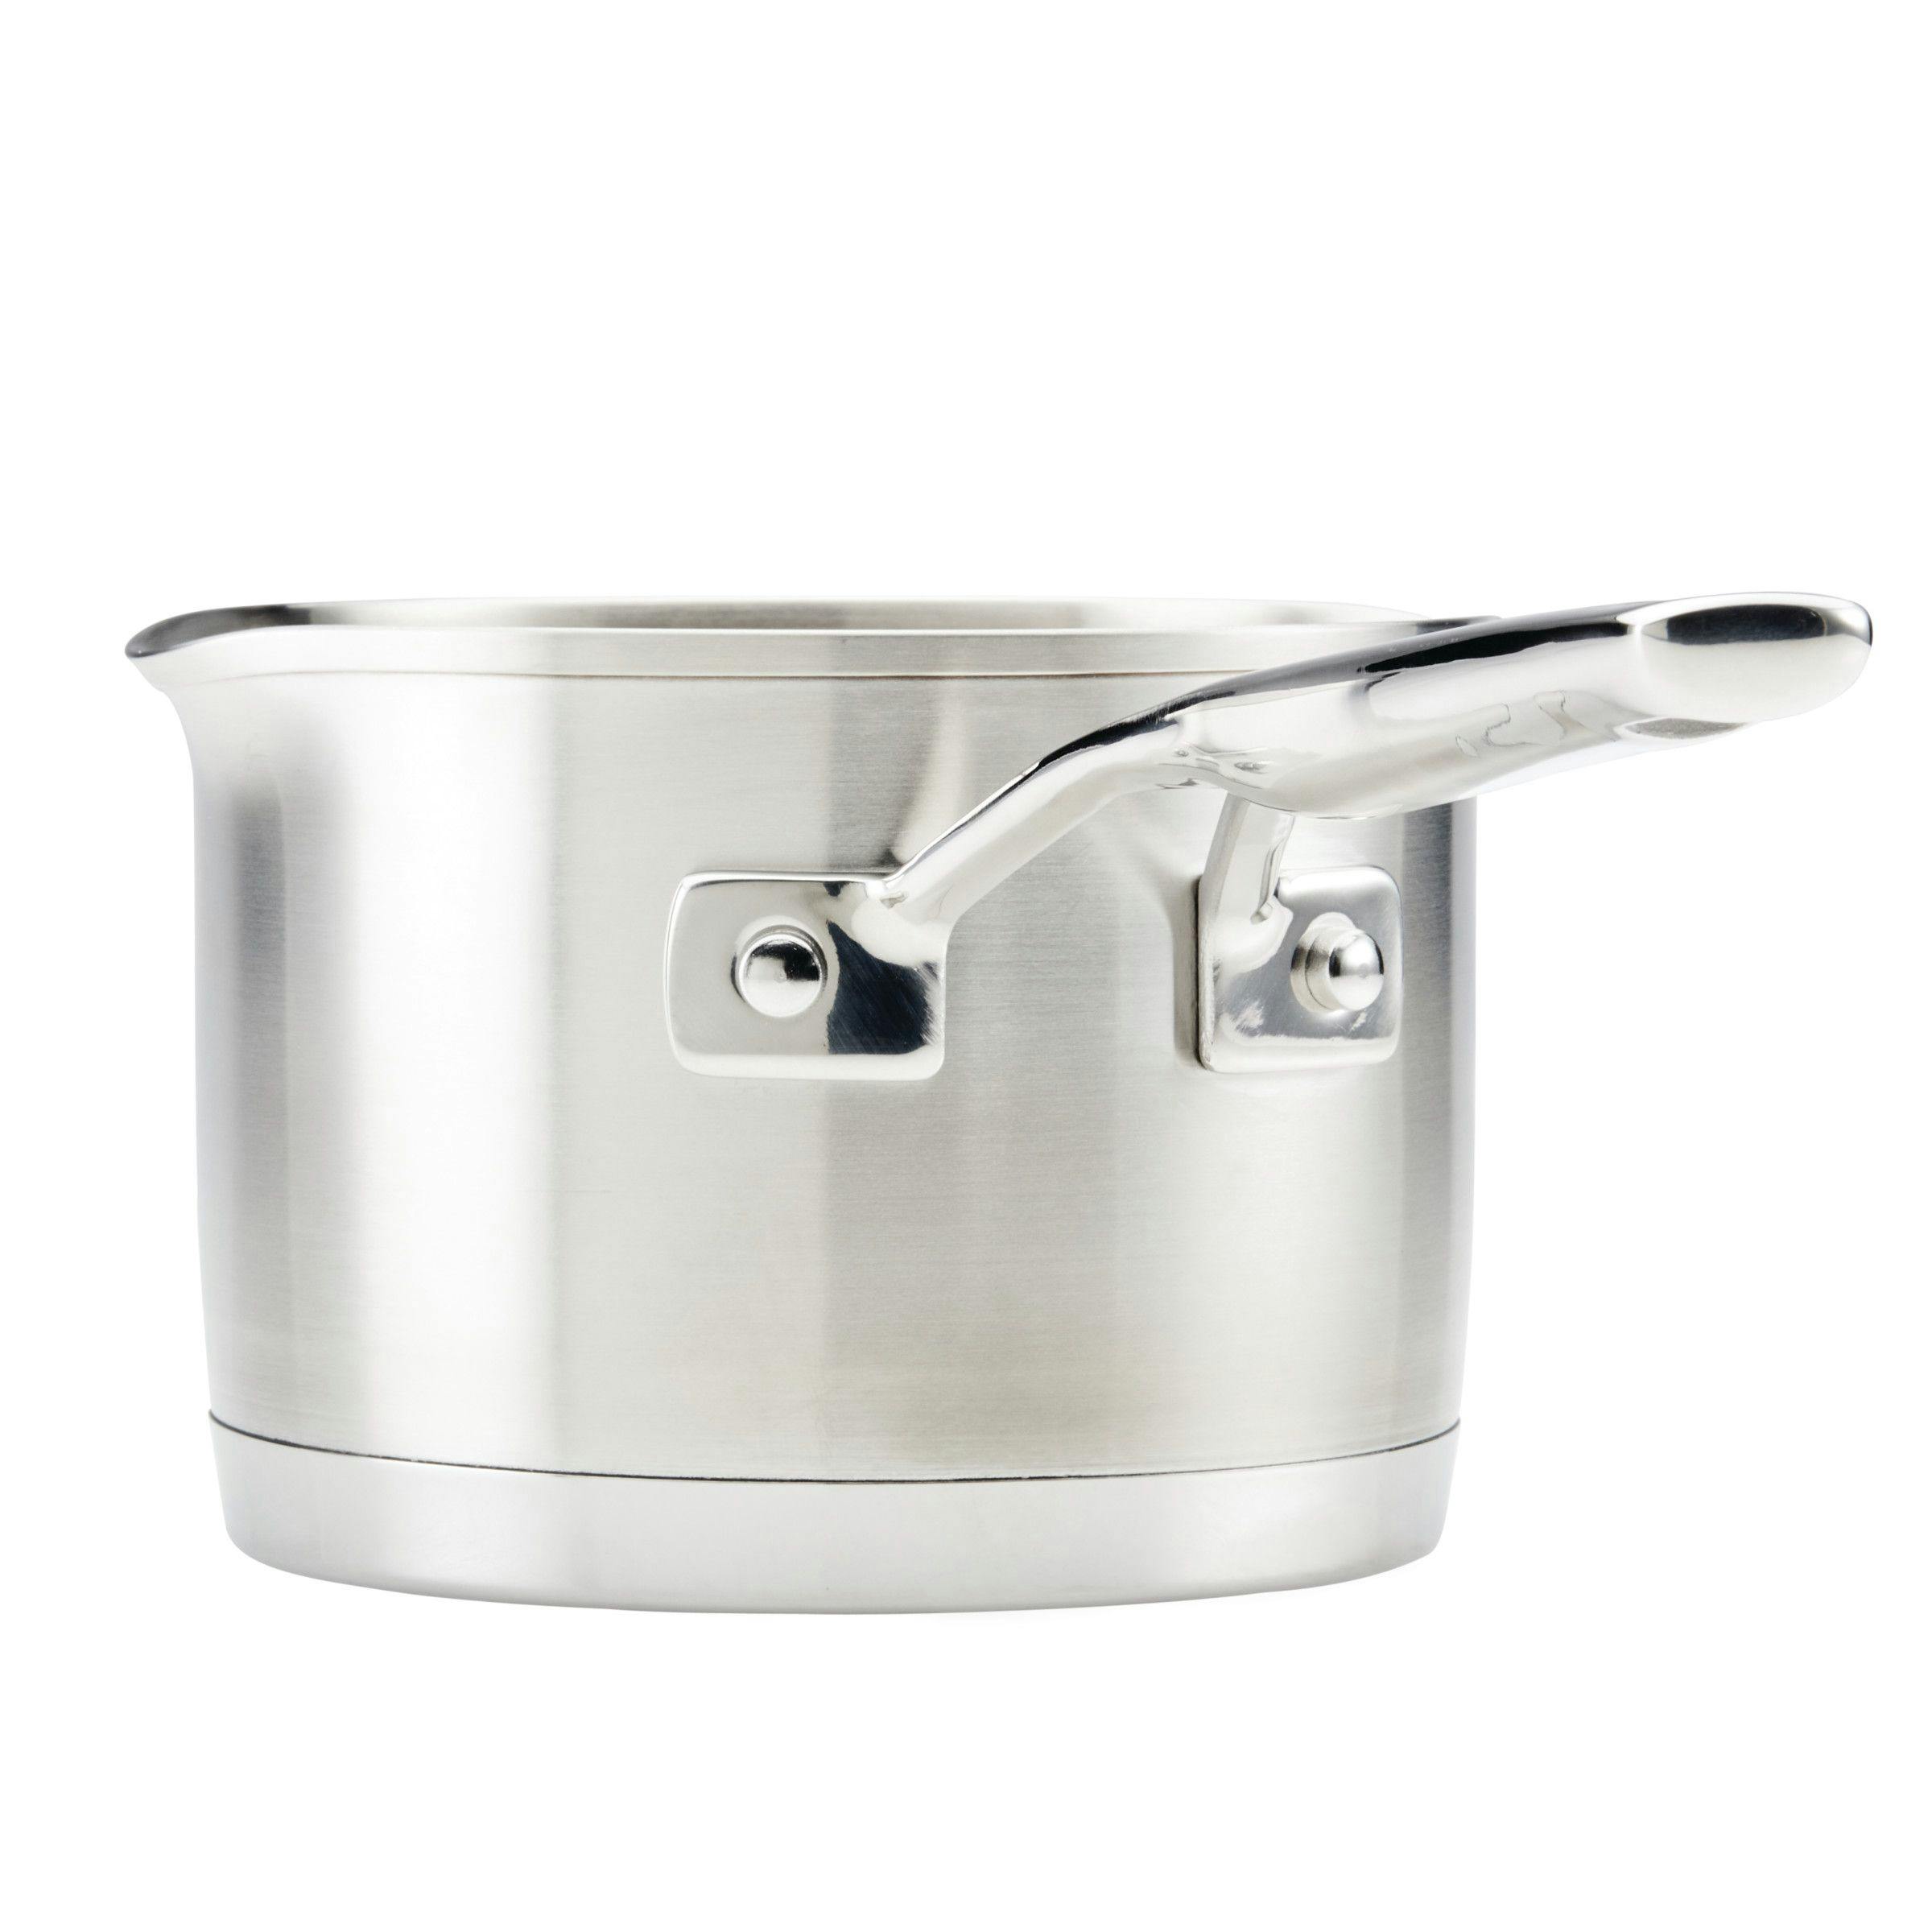 KitchenAid 3-Ply Base Stainless Steel Induction Saucepan with Pour Spouts, 1.5-Quart, Brushed Stainless Steel